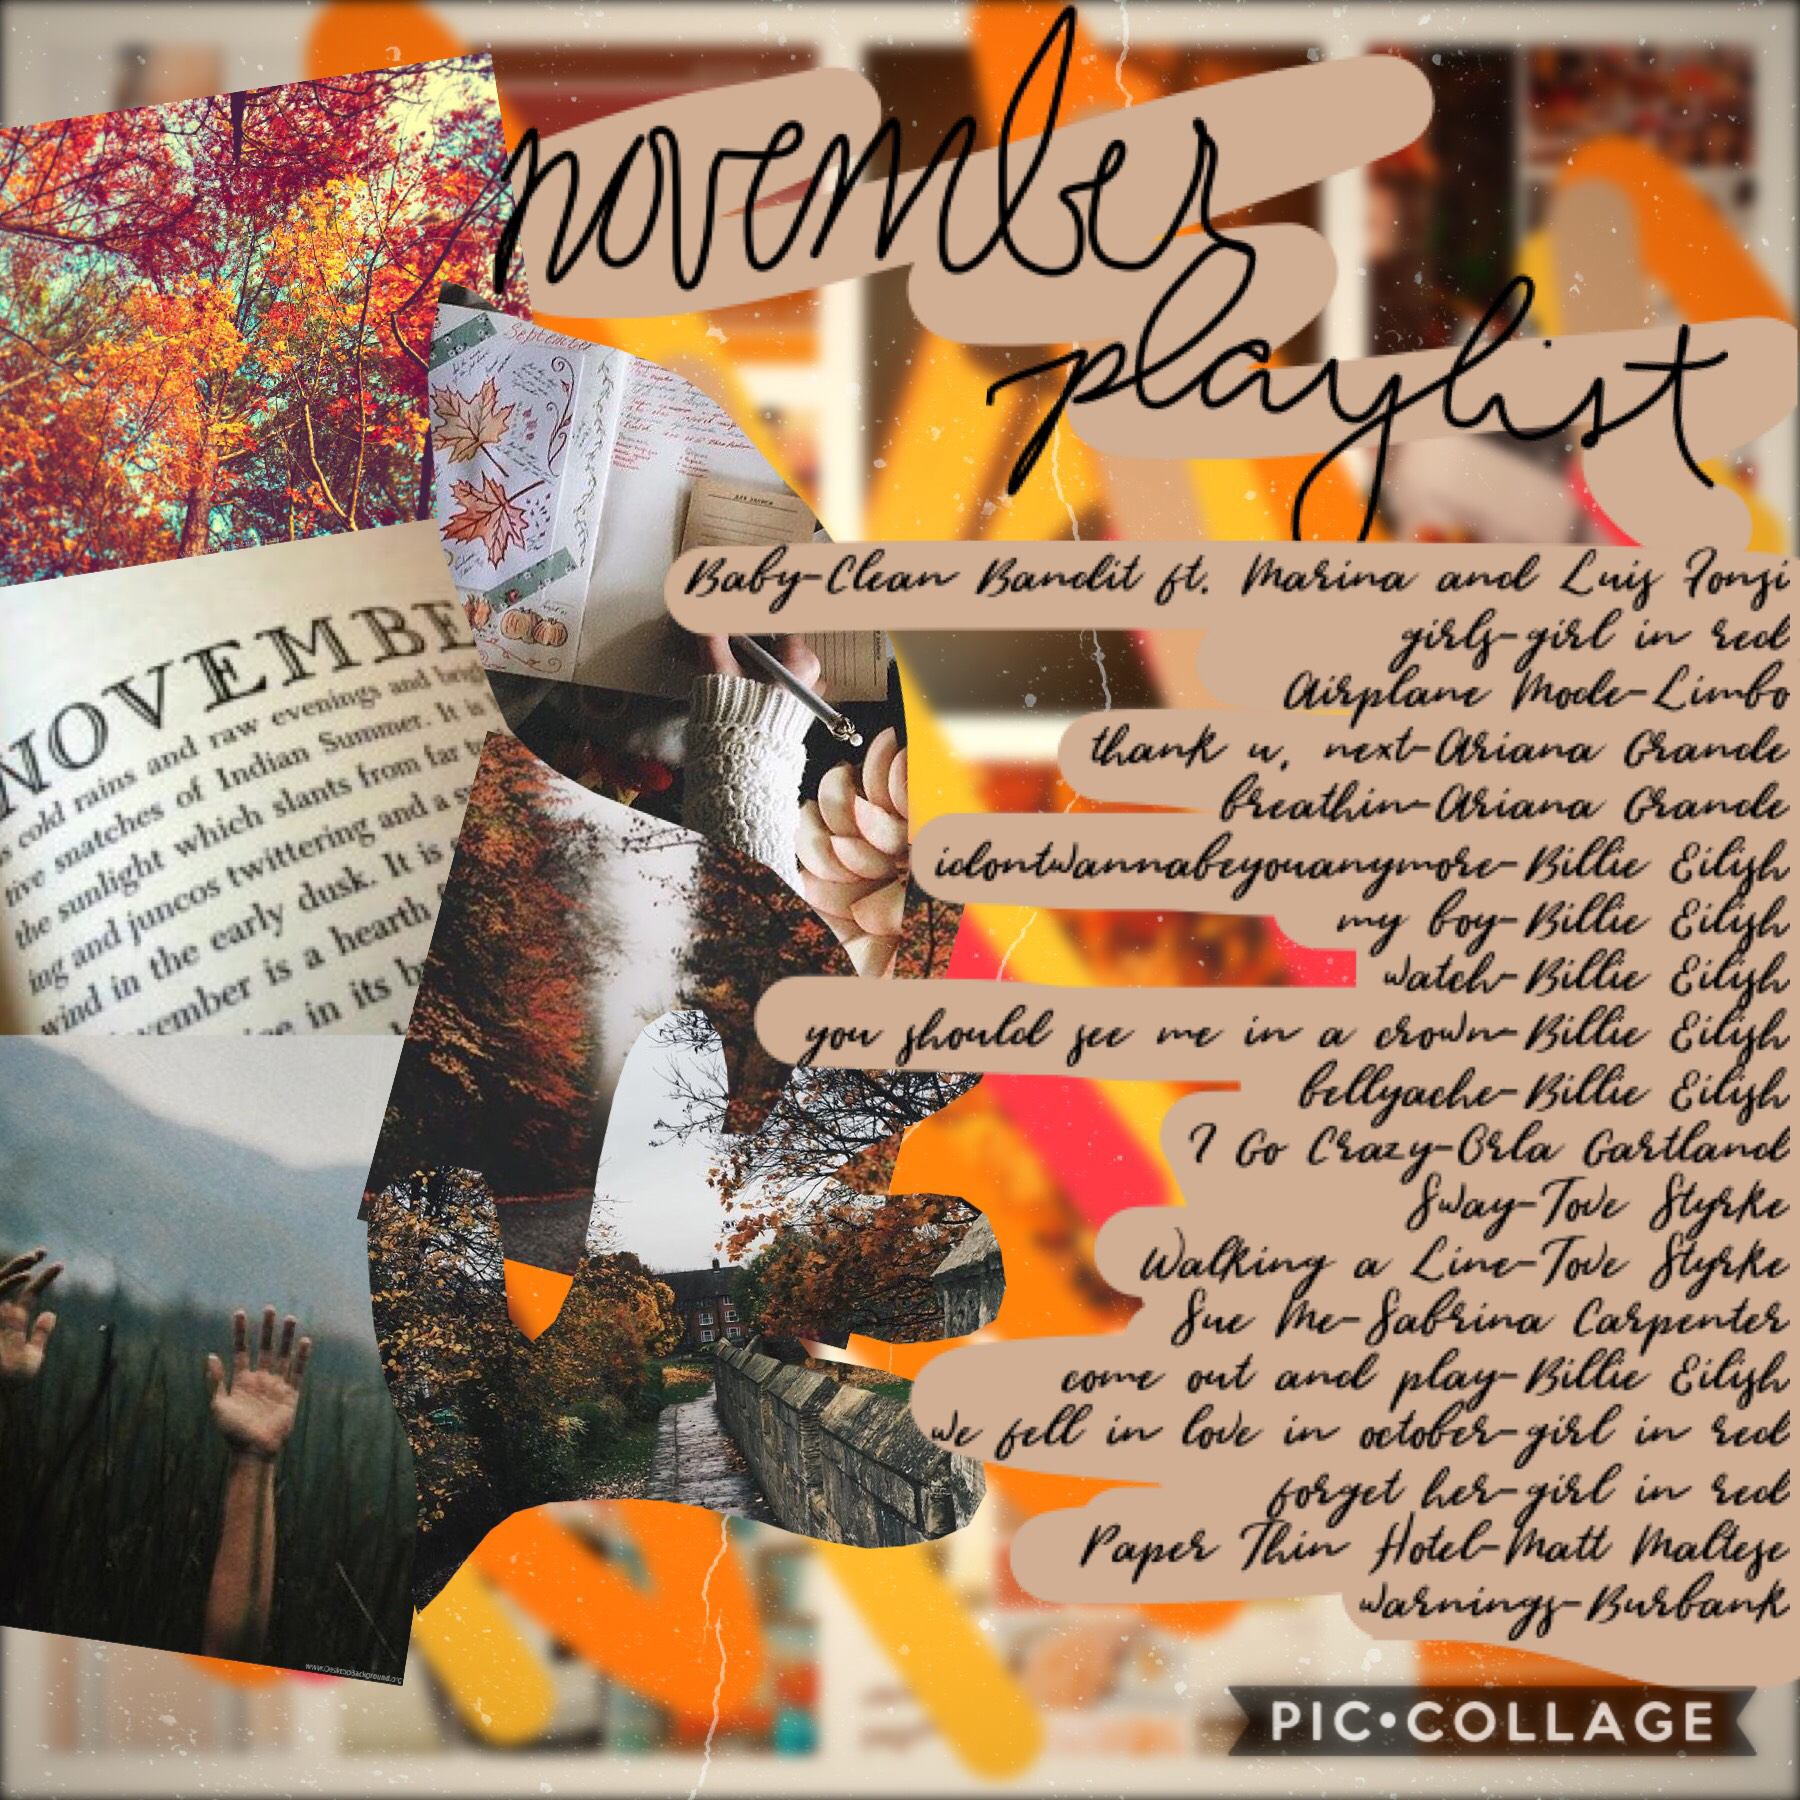 12/3/18
Here is my November playlist of songs I listened to on repeat during that month. I know there’s a lot of Billie Eilish but just let me LIVE MY LIFE!!!